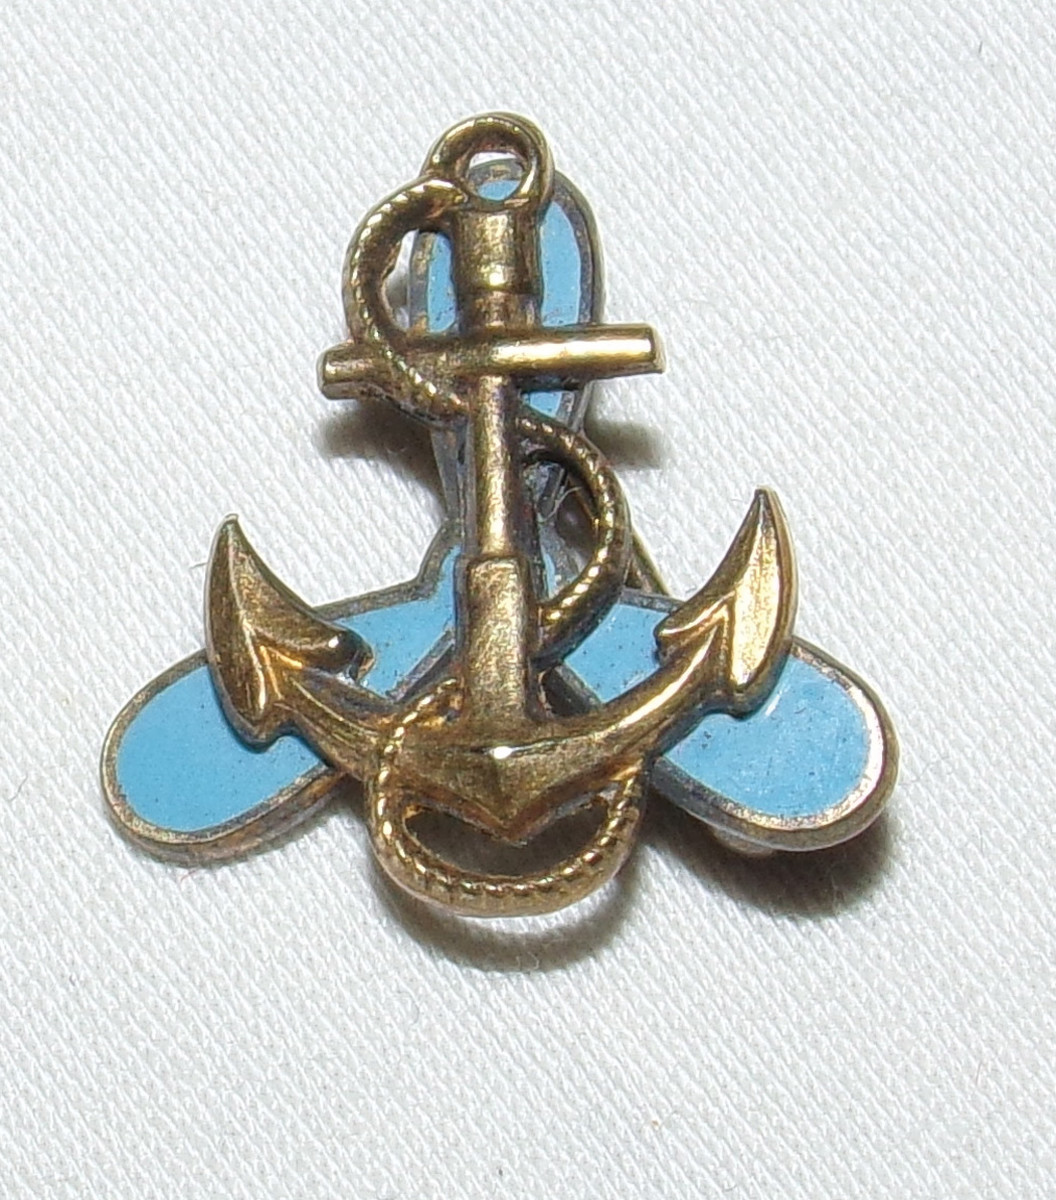 A small WAVE pin with gold anchor and blue enamel propeller.